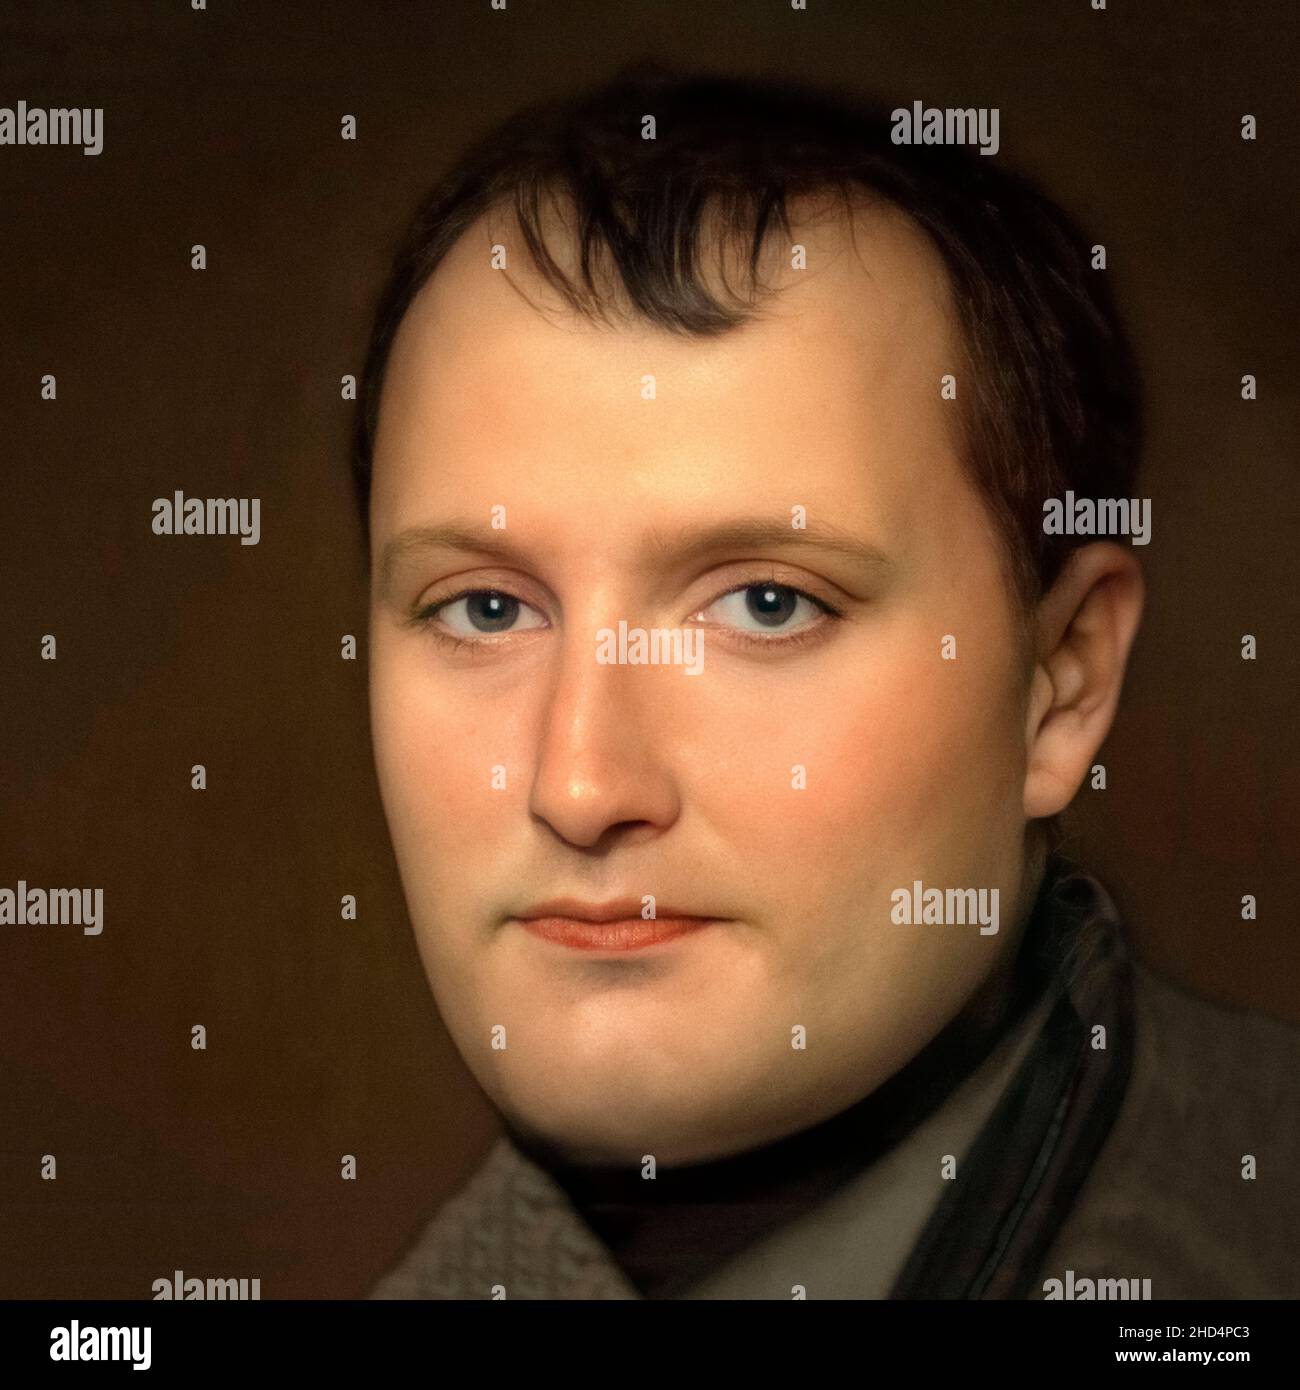 Based on historical documents, reconstruction by an artificial intelligence of the face of Napoleon I. Photo realistic portrait. Stock Photo